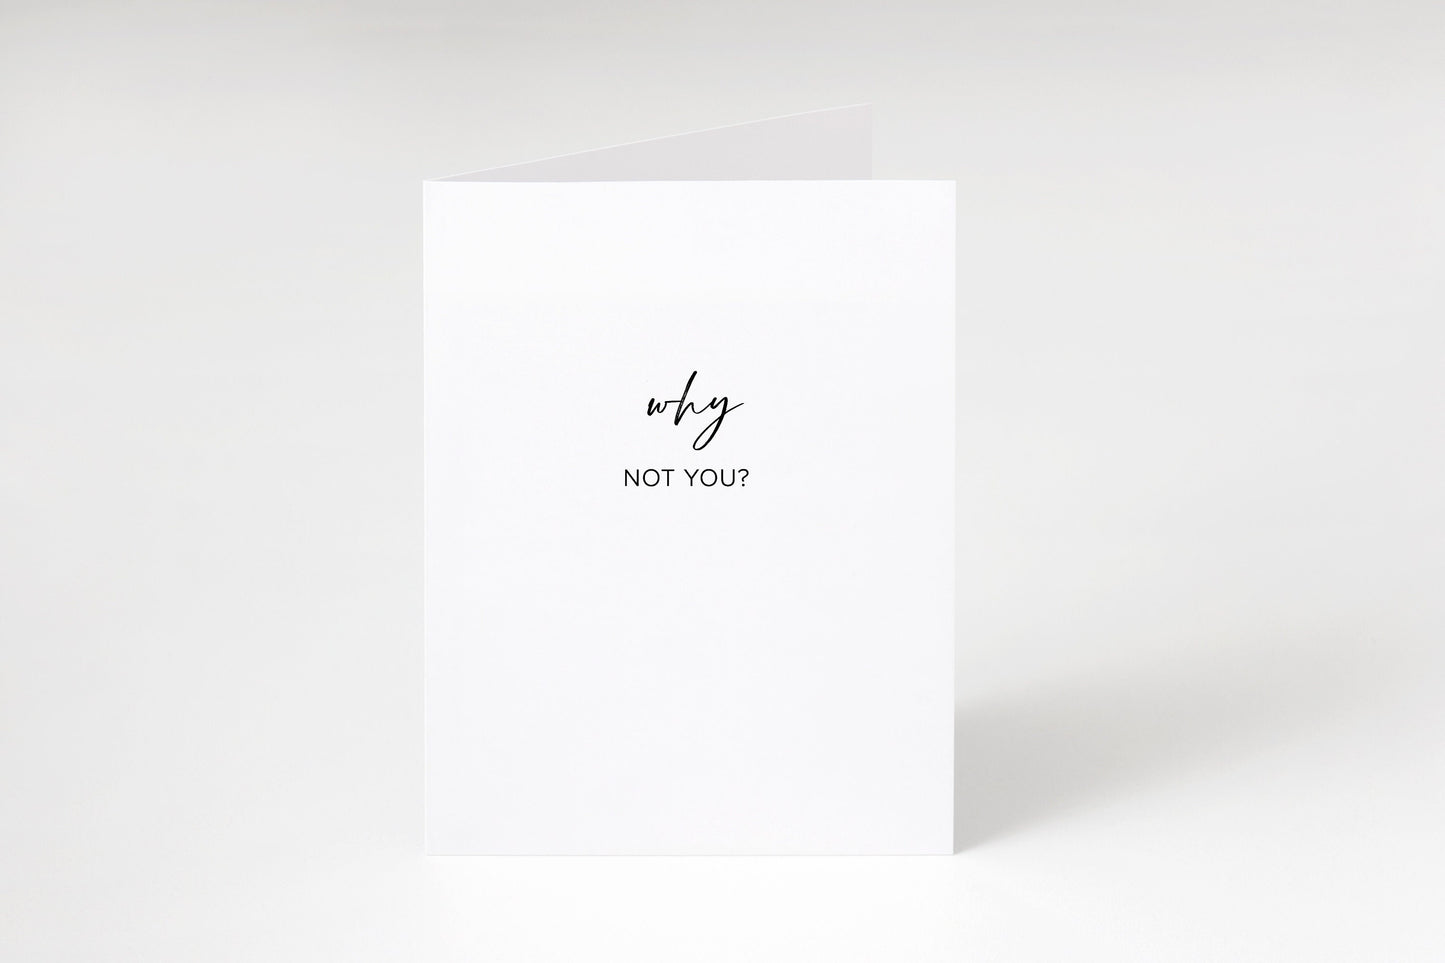 Why not you,Encouragement card,Inspirational card,Motivational card,Thoughtful card,Card for friend,Thinking of you card,Support card